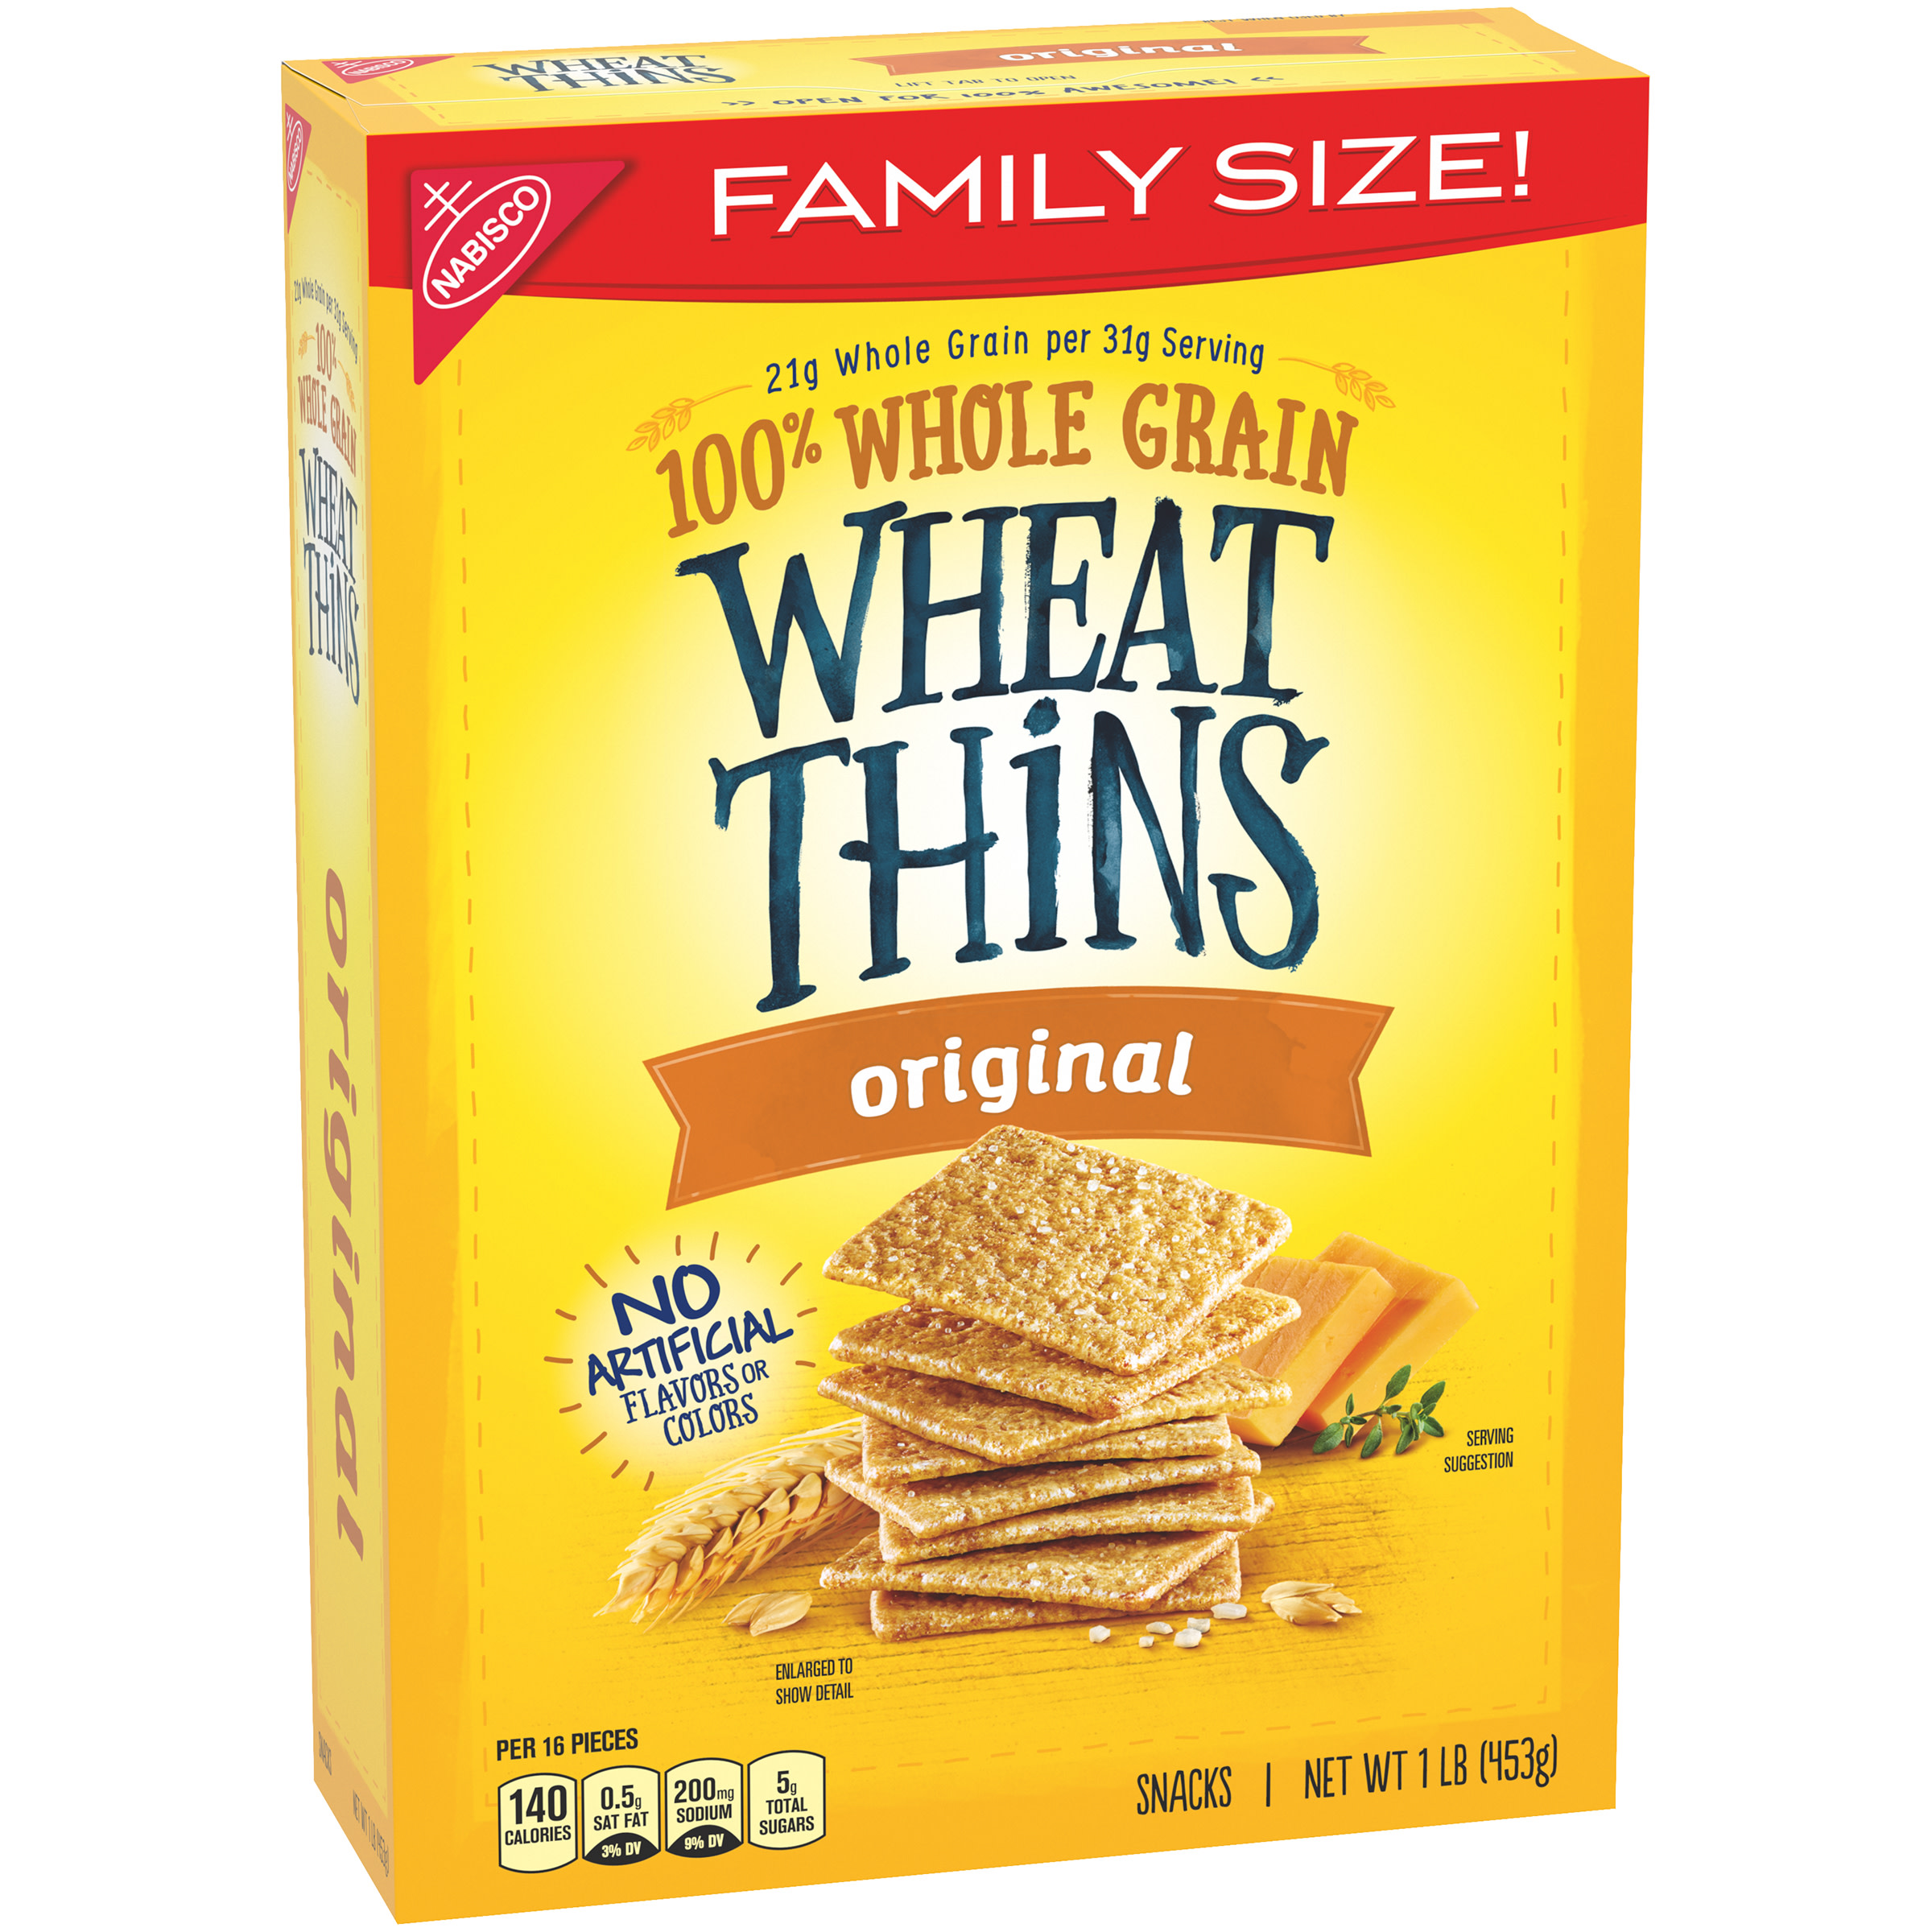 Wheat Thins Original Whole Grain Wheat Crackers, Family Size, 16 oz - image 2 of 16